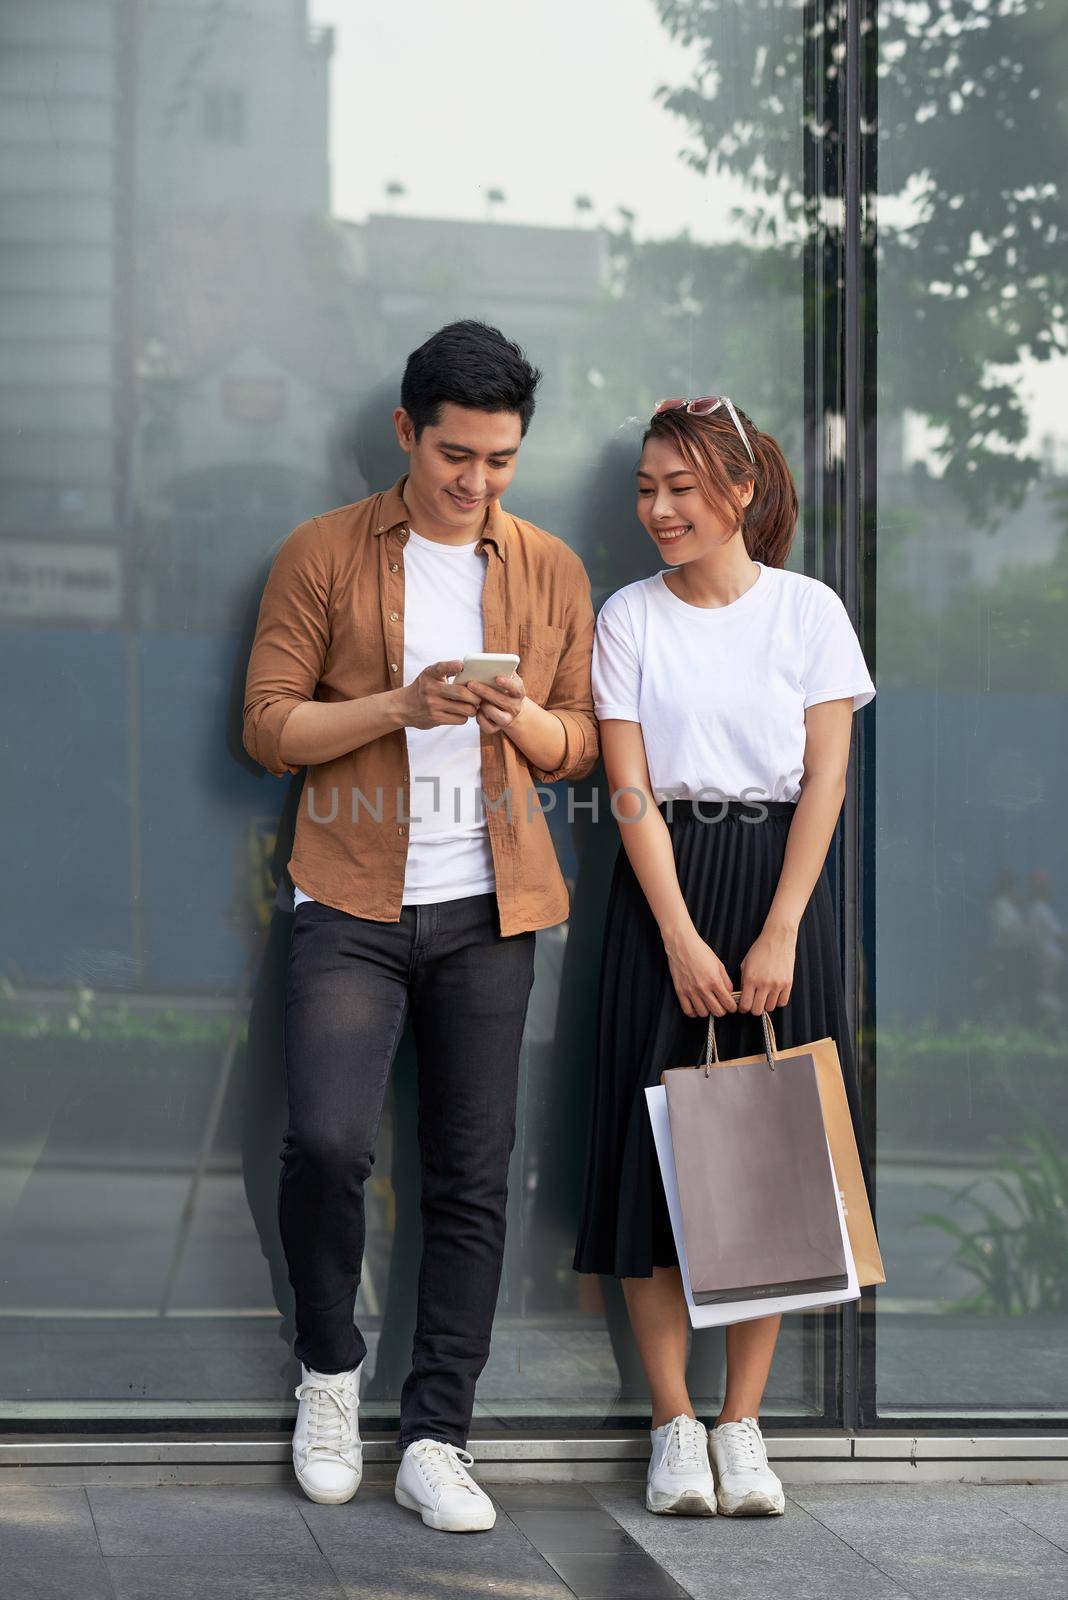 A picture of a couple shopping with smartphone in the city 